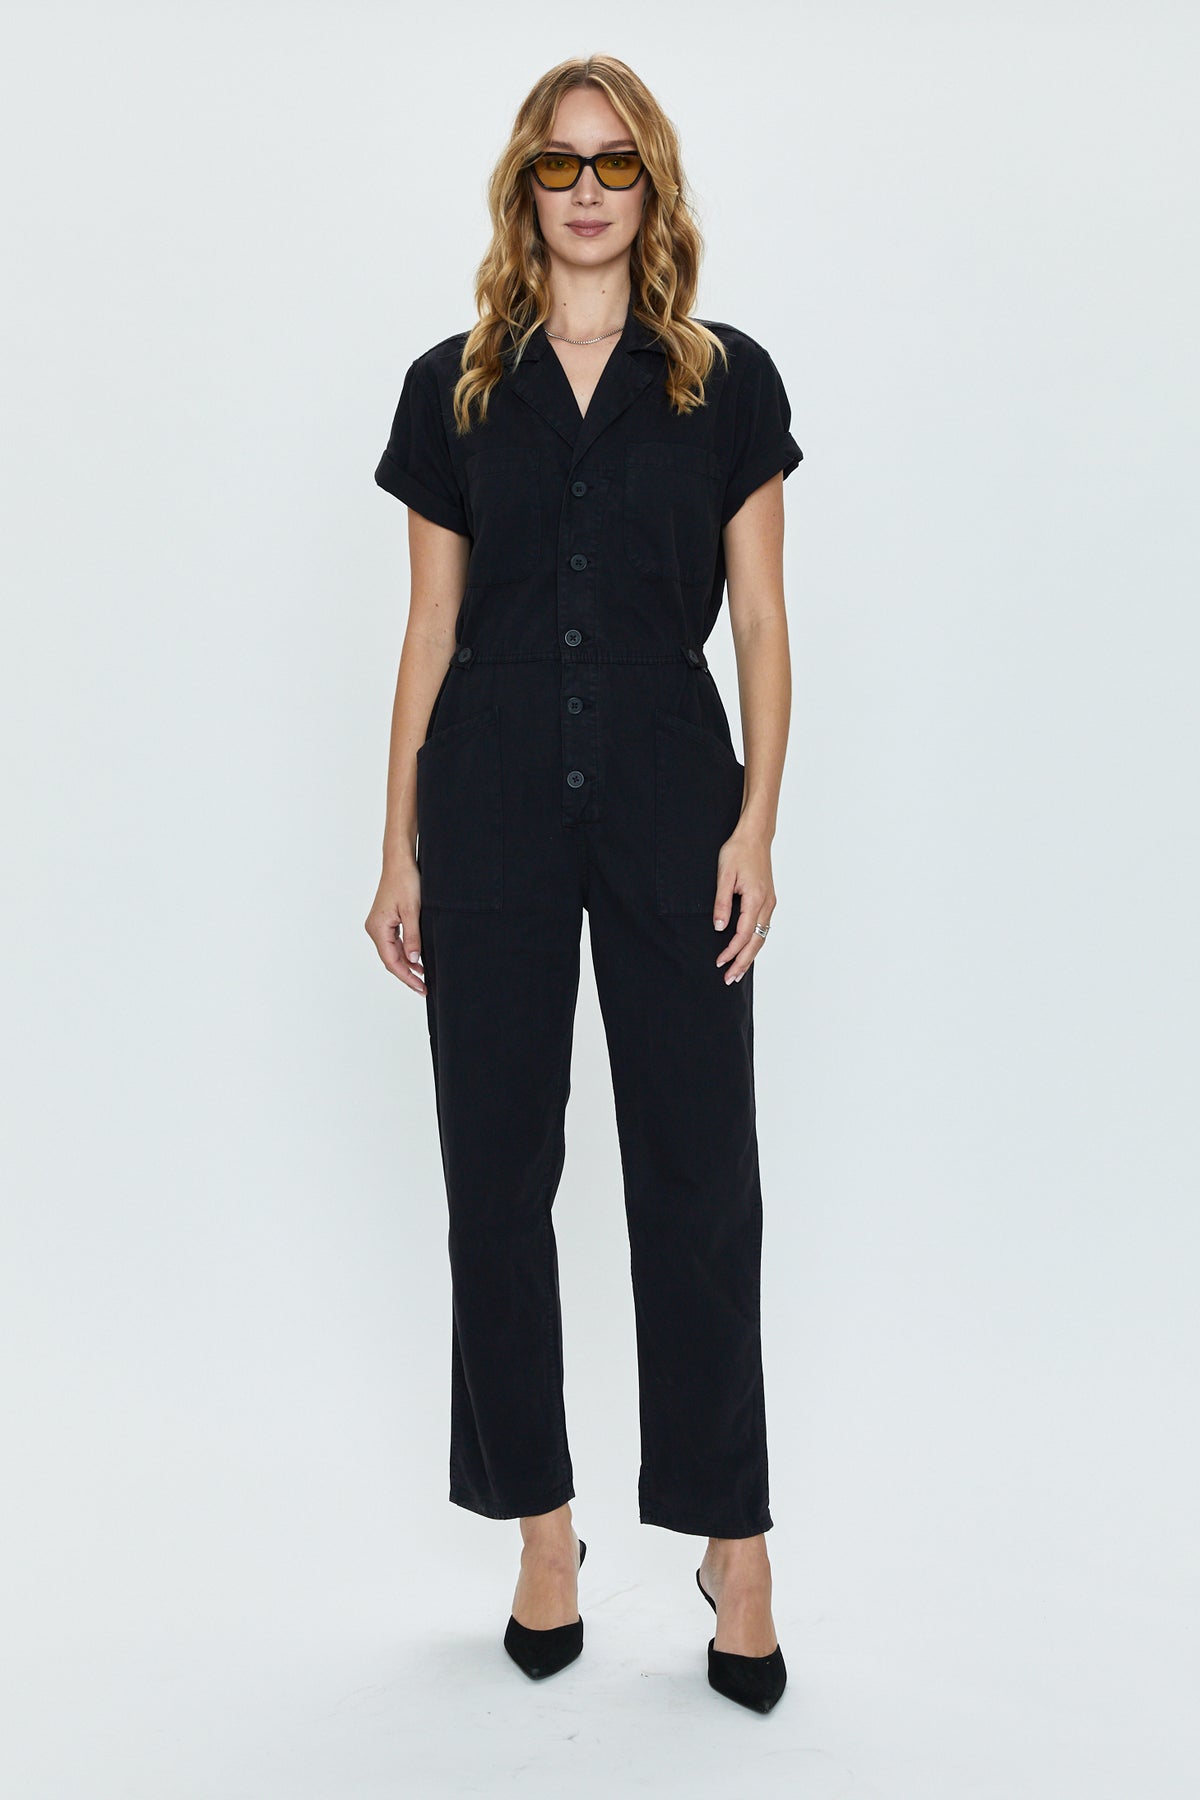 Grover Short Sleeve Field Suit - Fade To Black